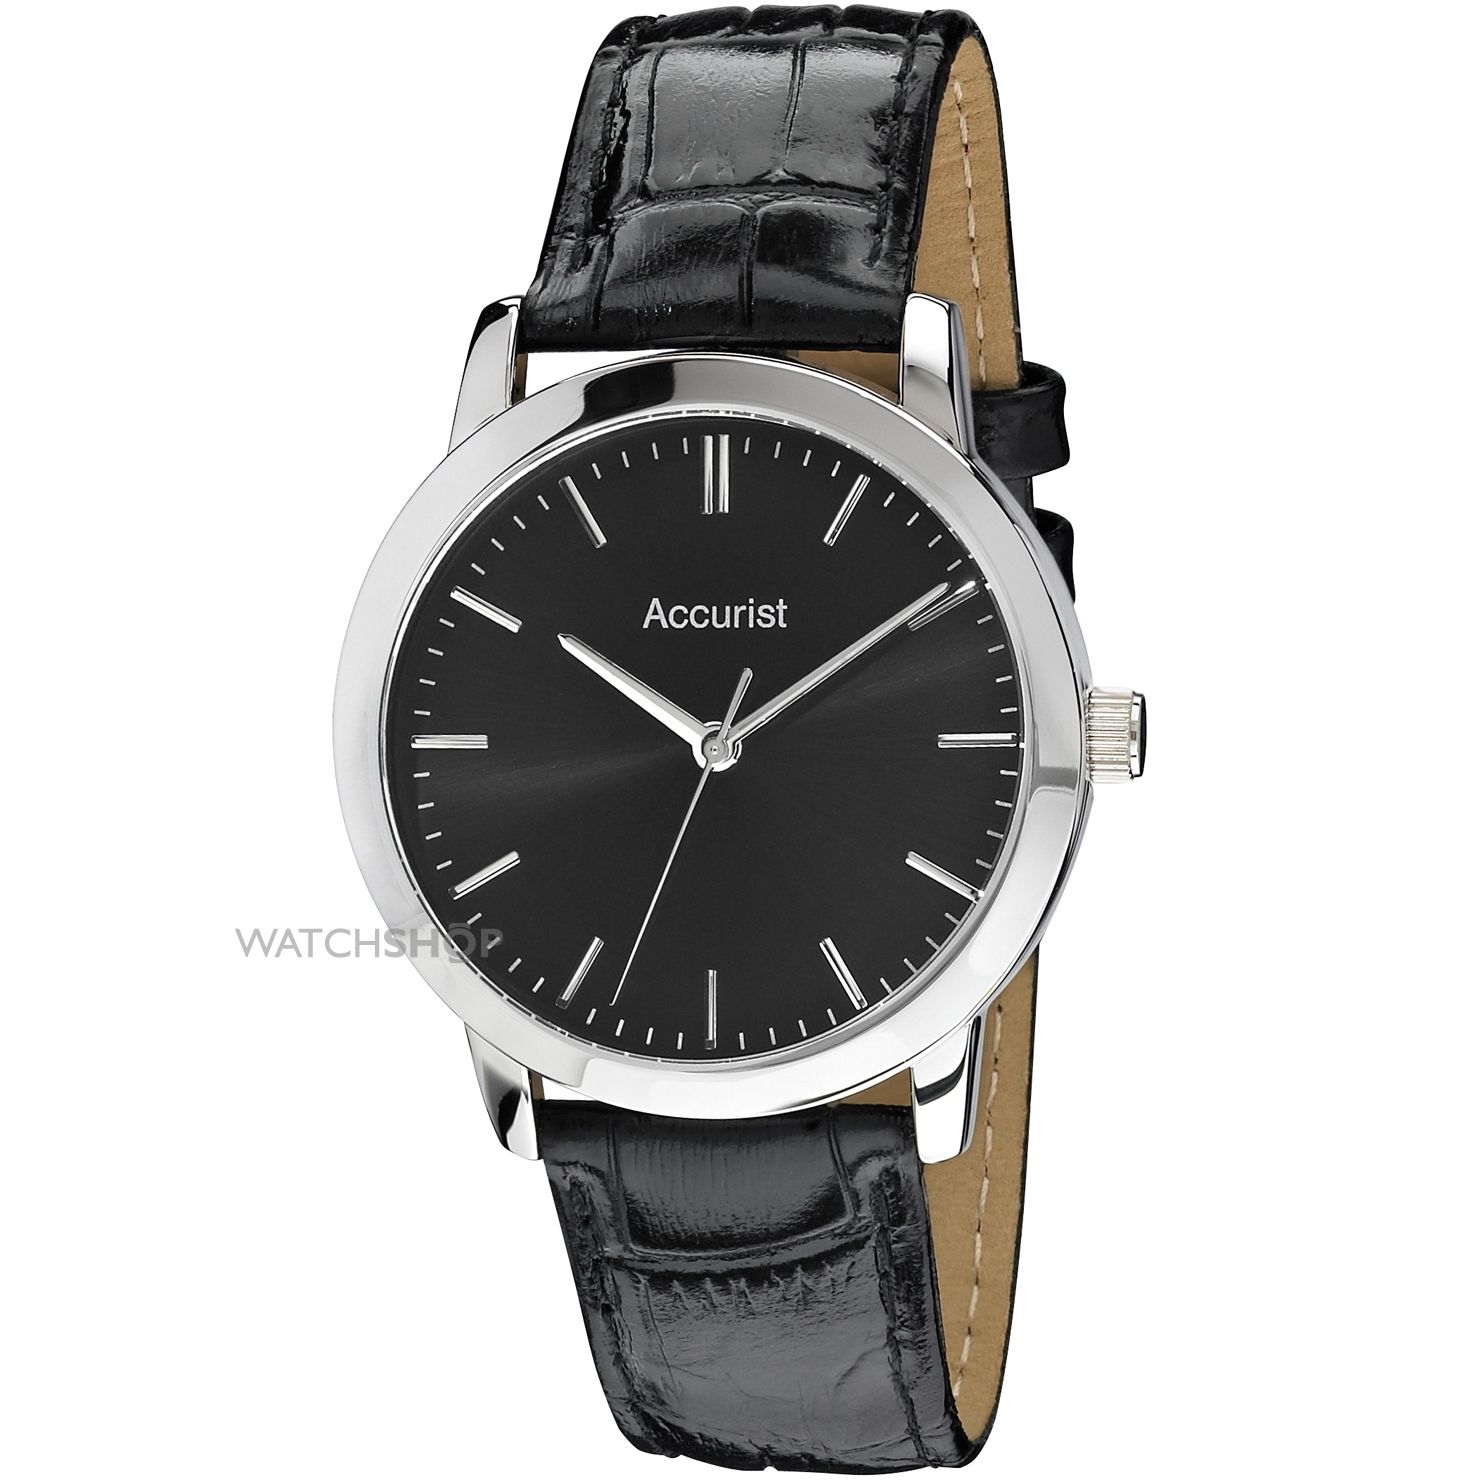 Accurist Men's Quartz Watch with Black Dial Analogue Display and Black Leather Strap MS672B